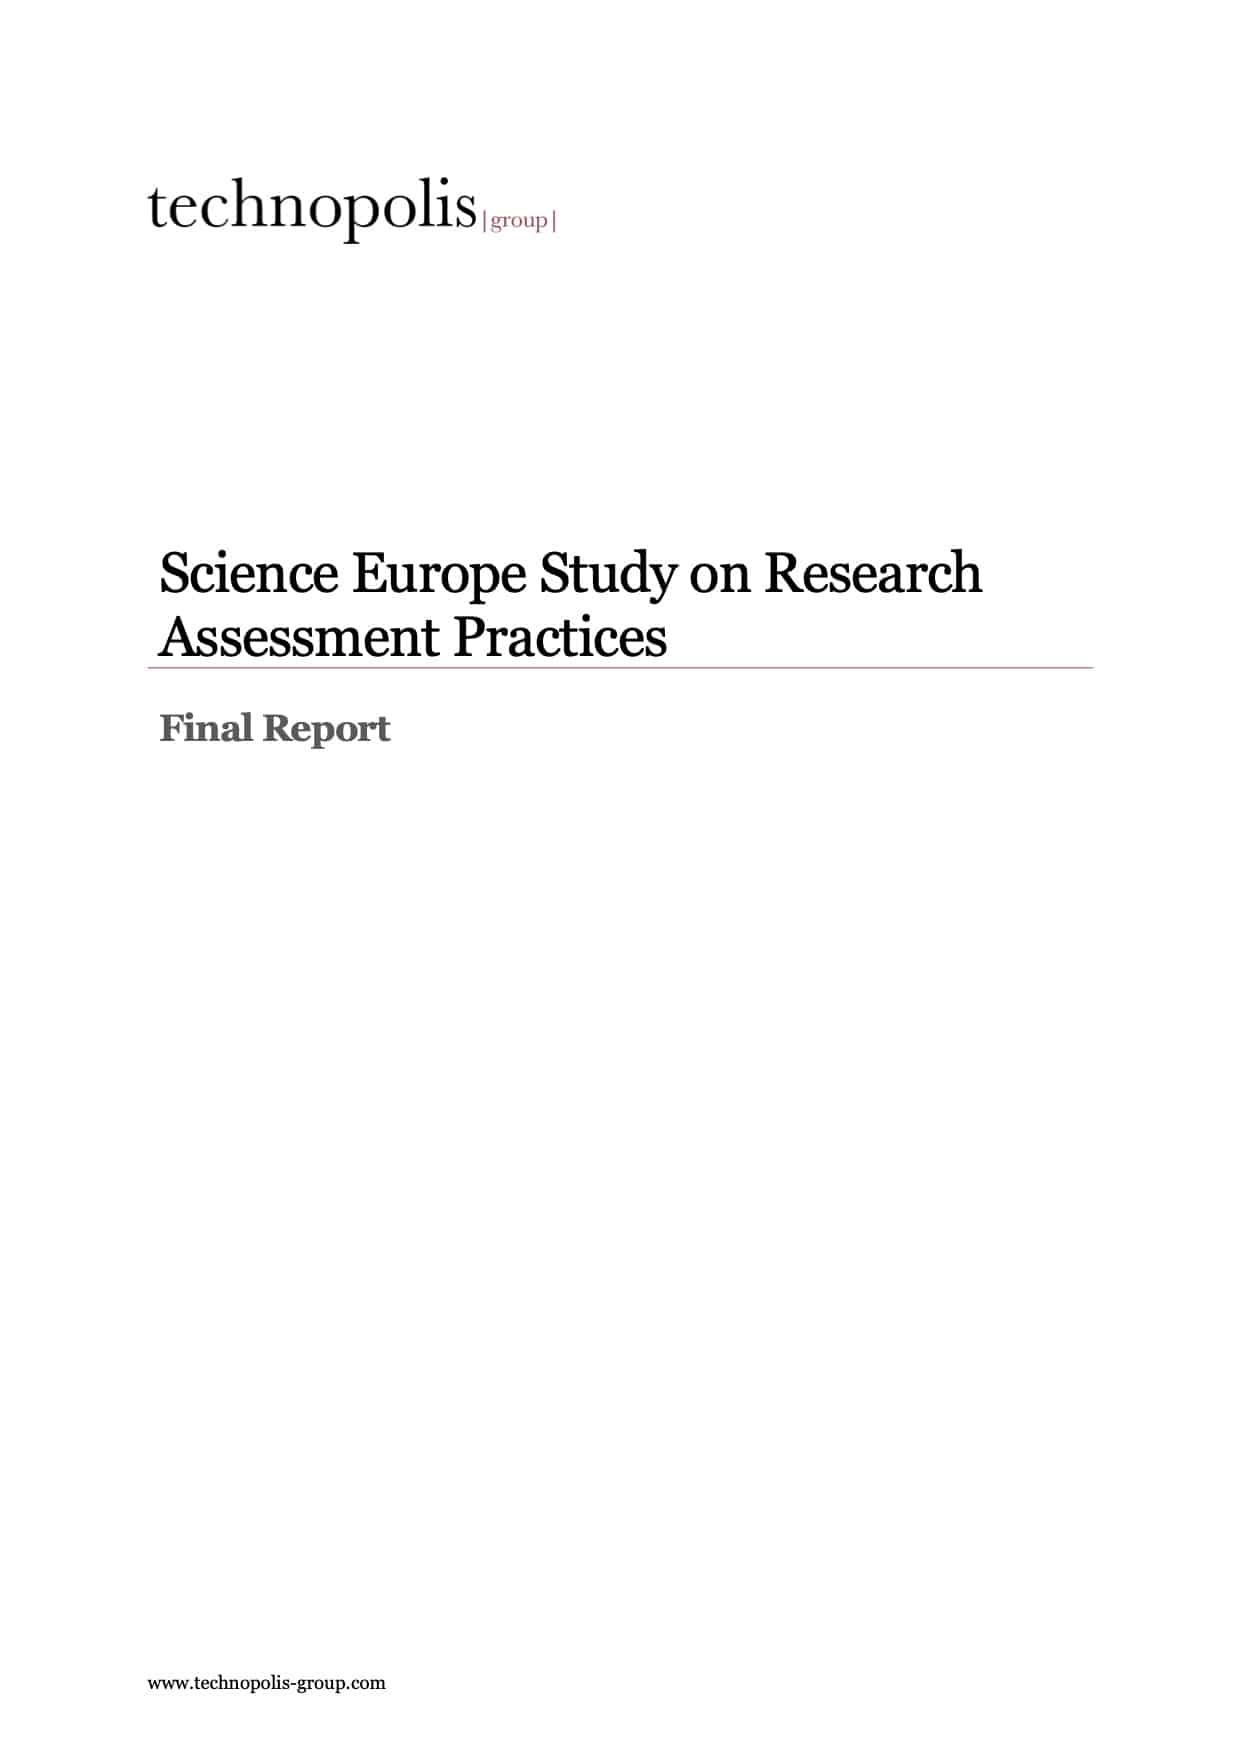 Science Europe Study on Research Assessment Practices